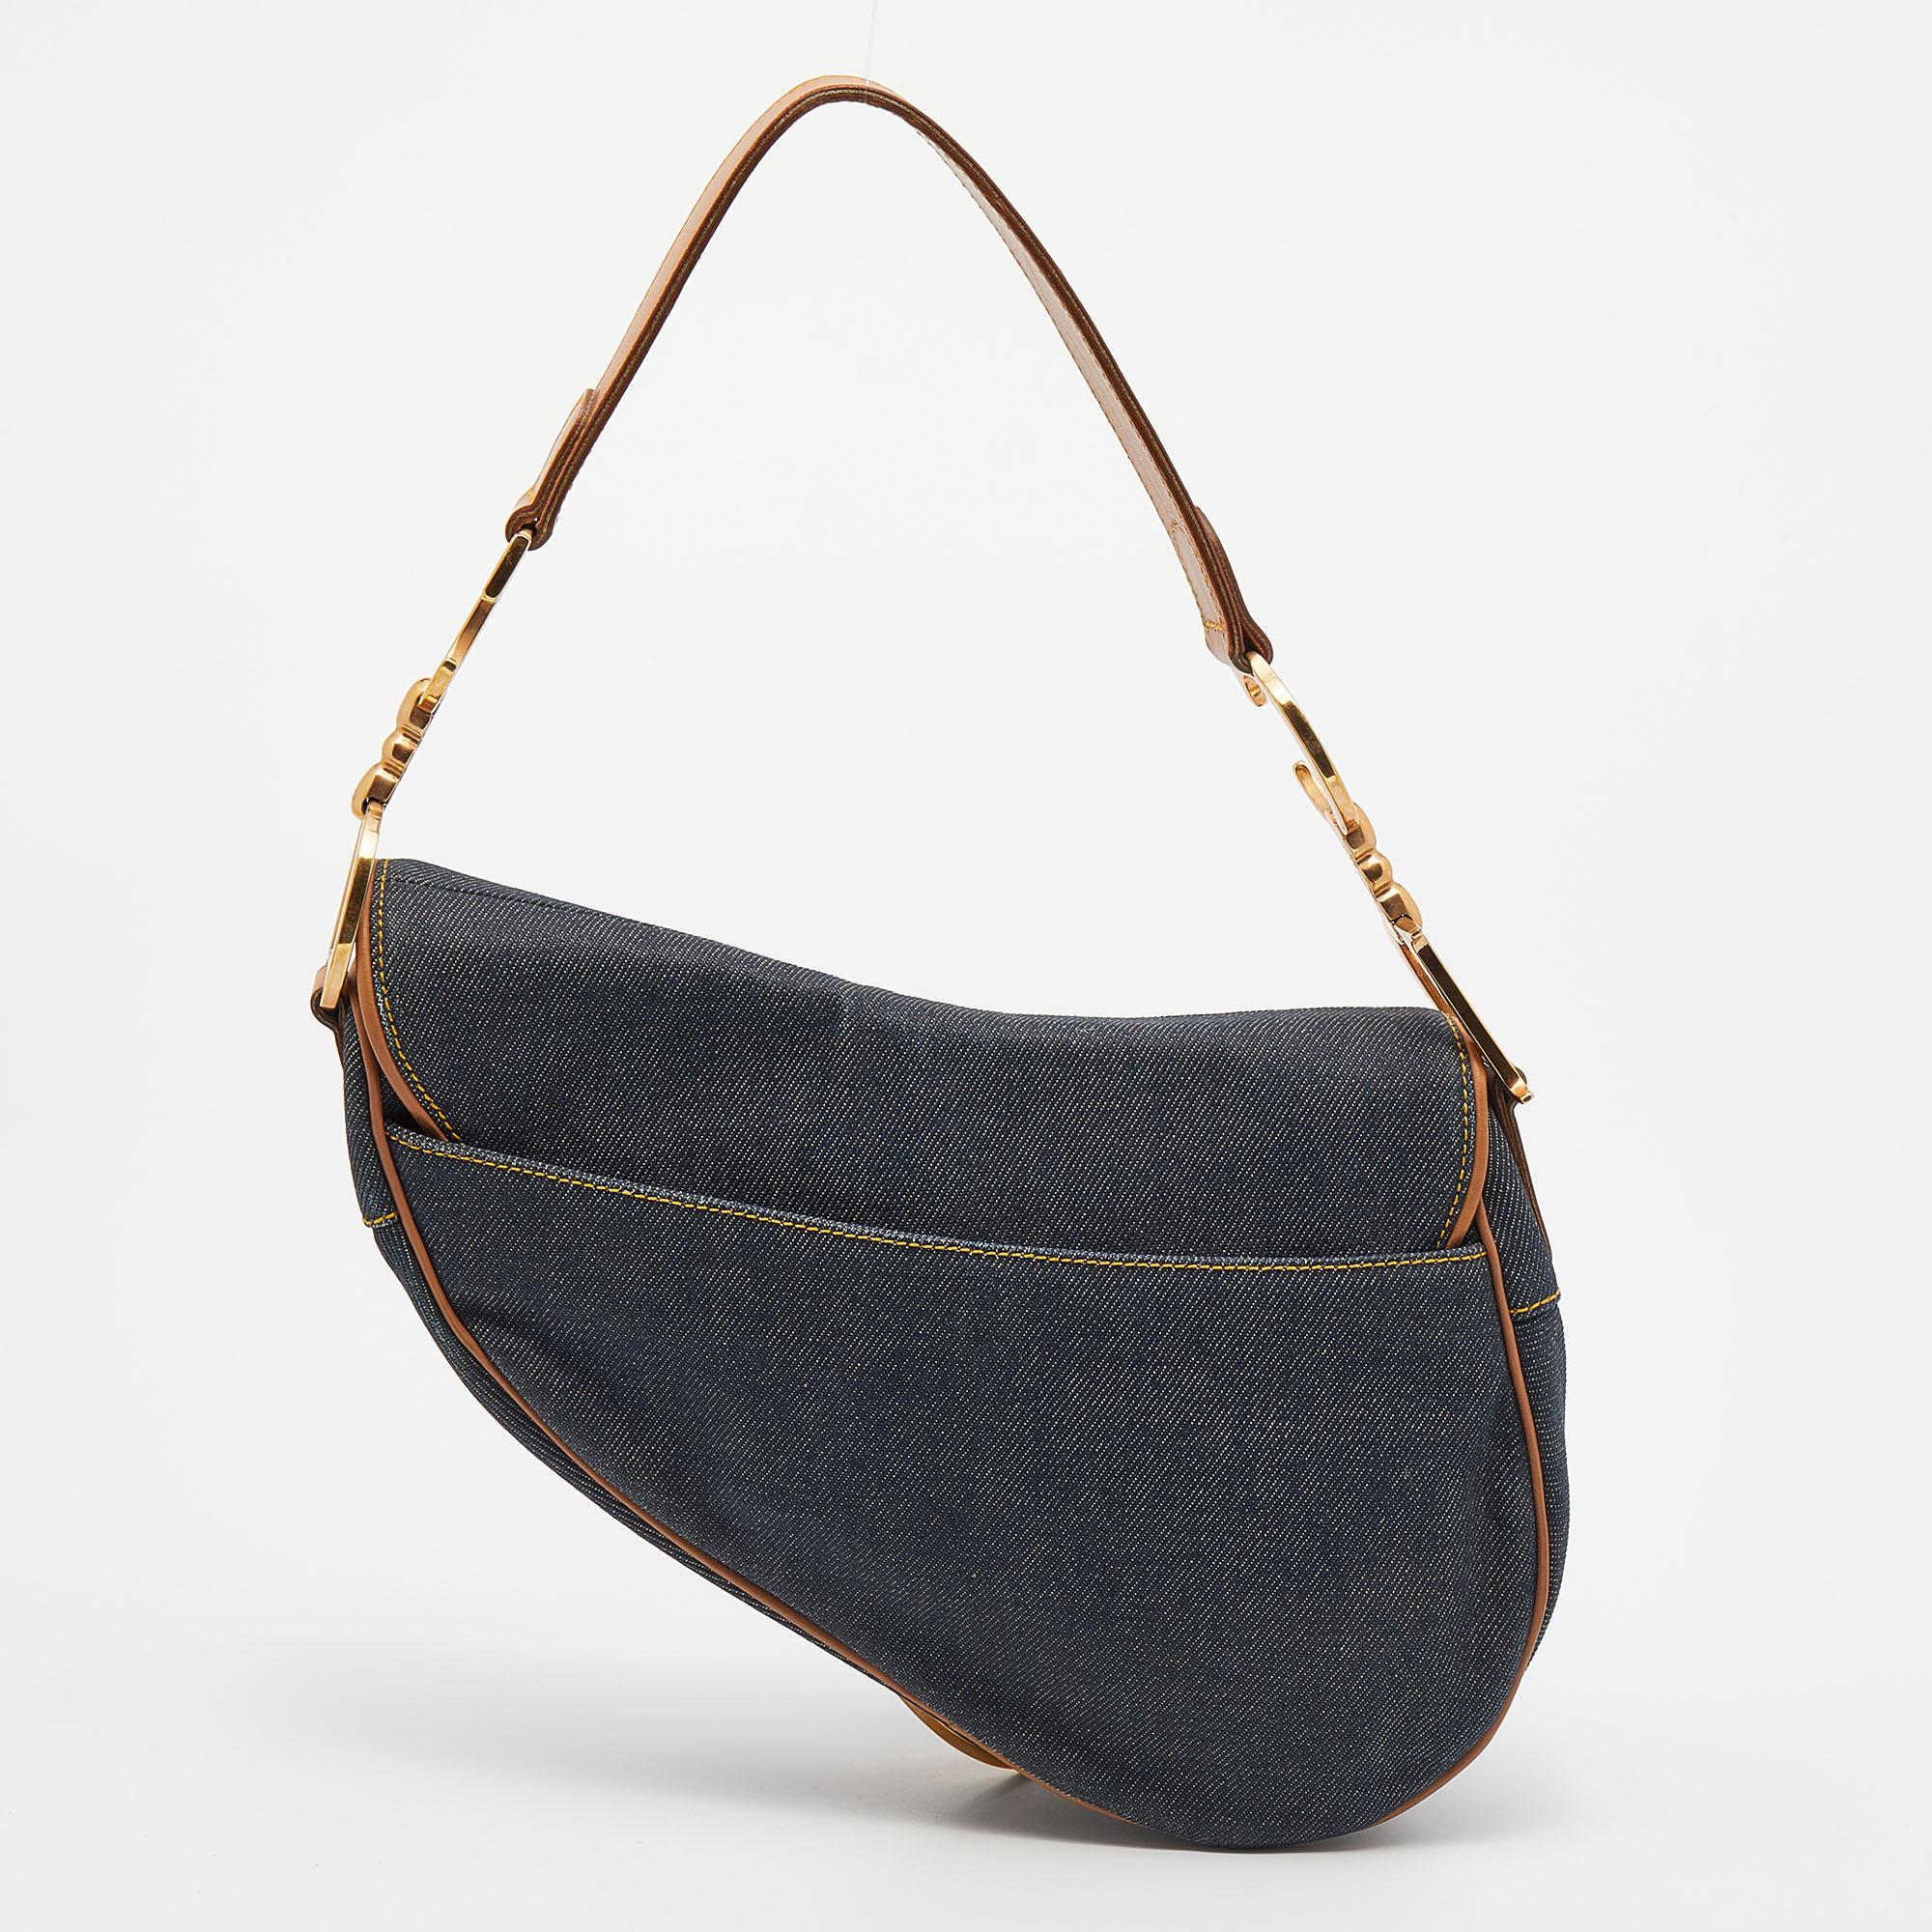 An example of timeless style and great design ideas, Dior's Saddle bag is sought after for all the right reasons. This Saddle bag for women is crafted using Denim in the iconic shape and it has CD letters to hold the single handle and a dangling D